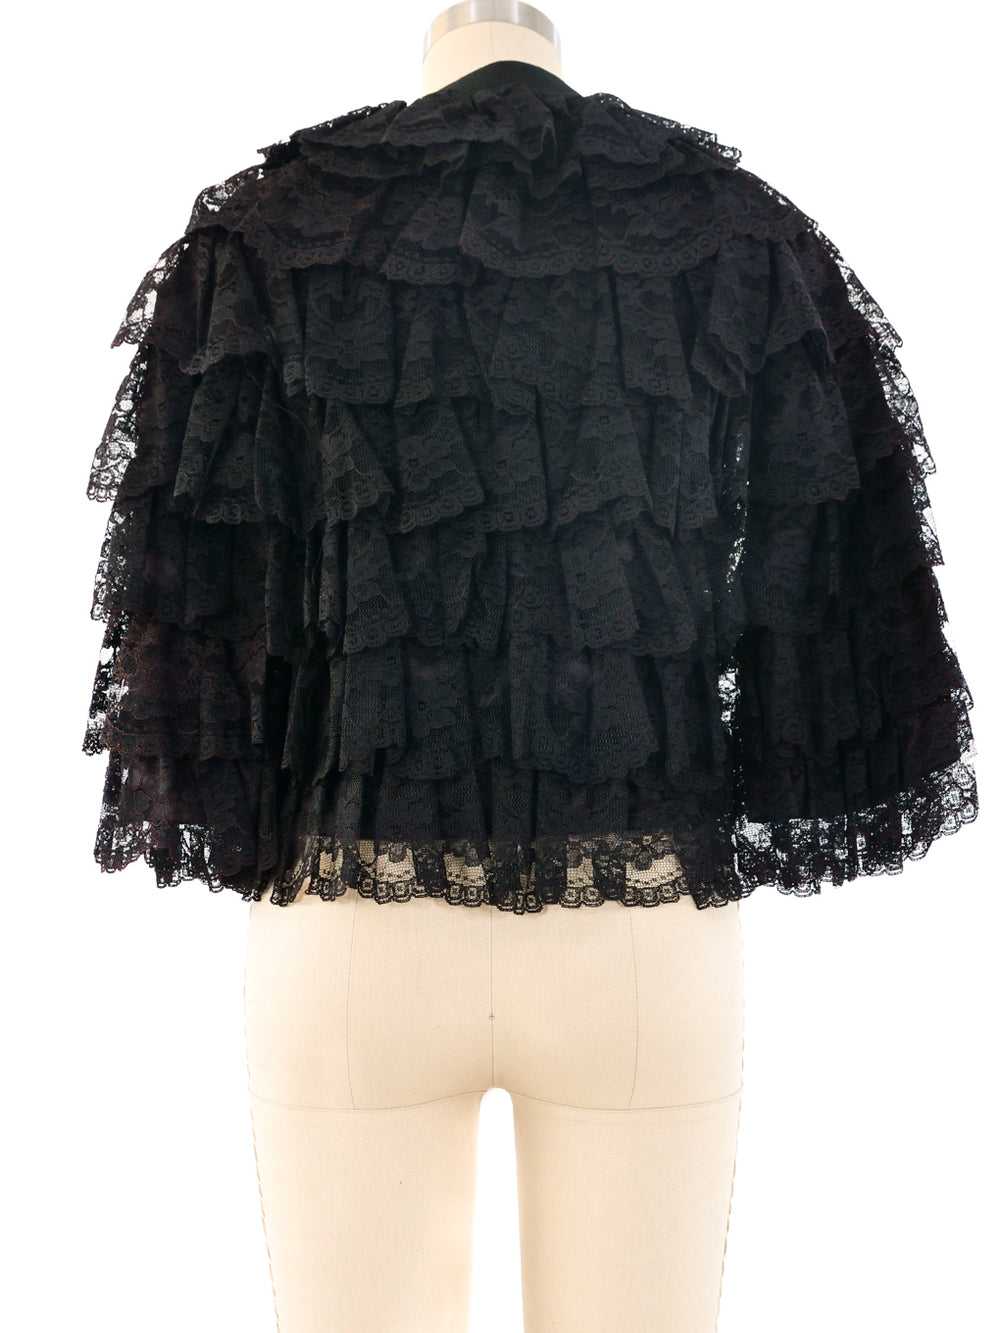 Scott Barrie Tiered Lace Jacket - image 4